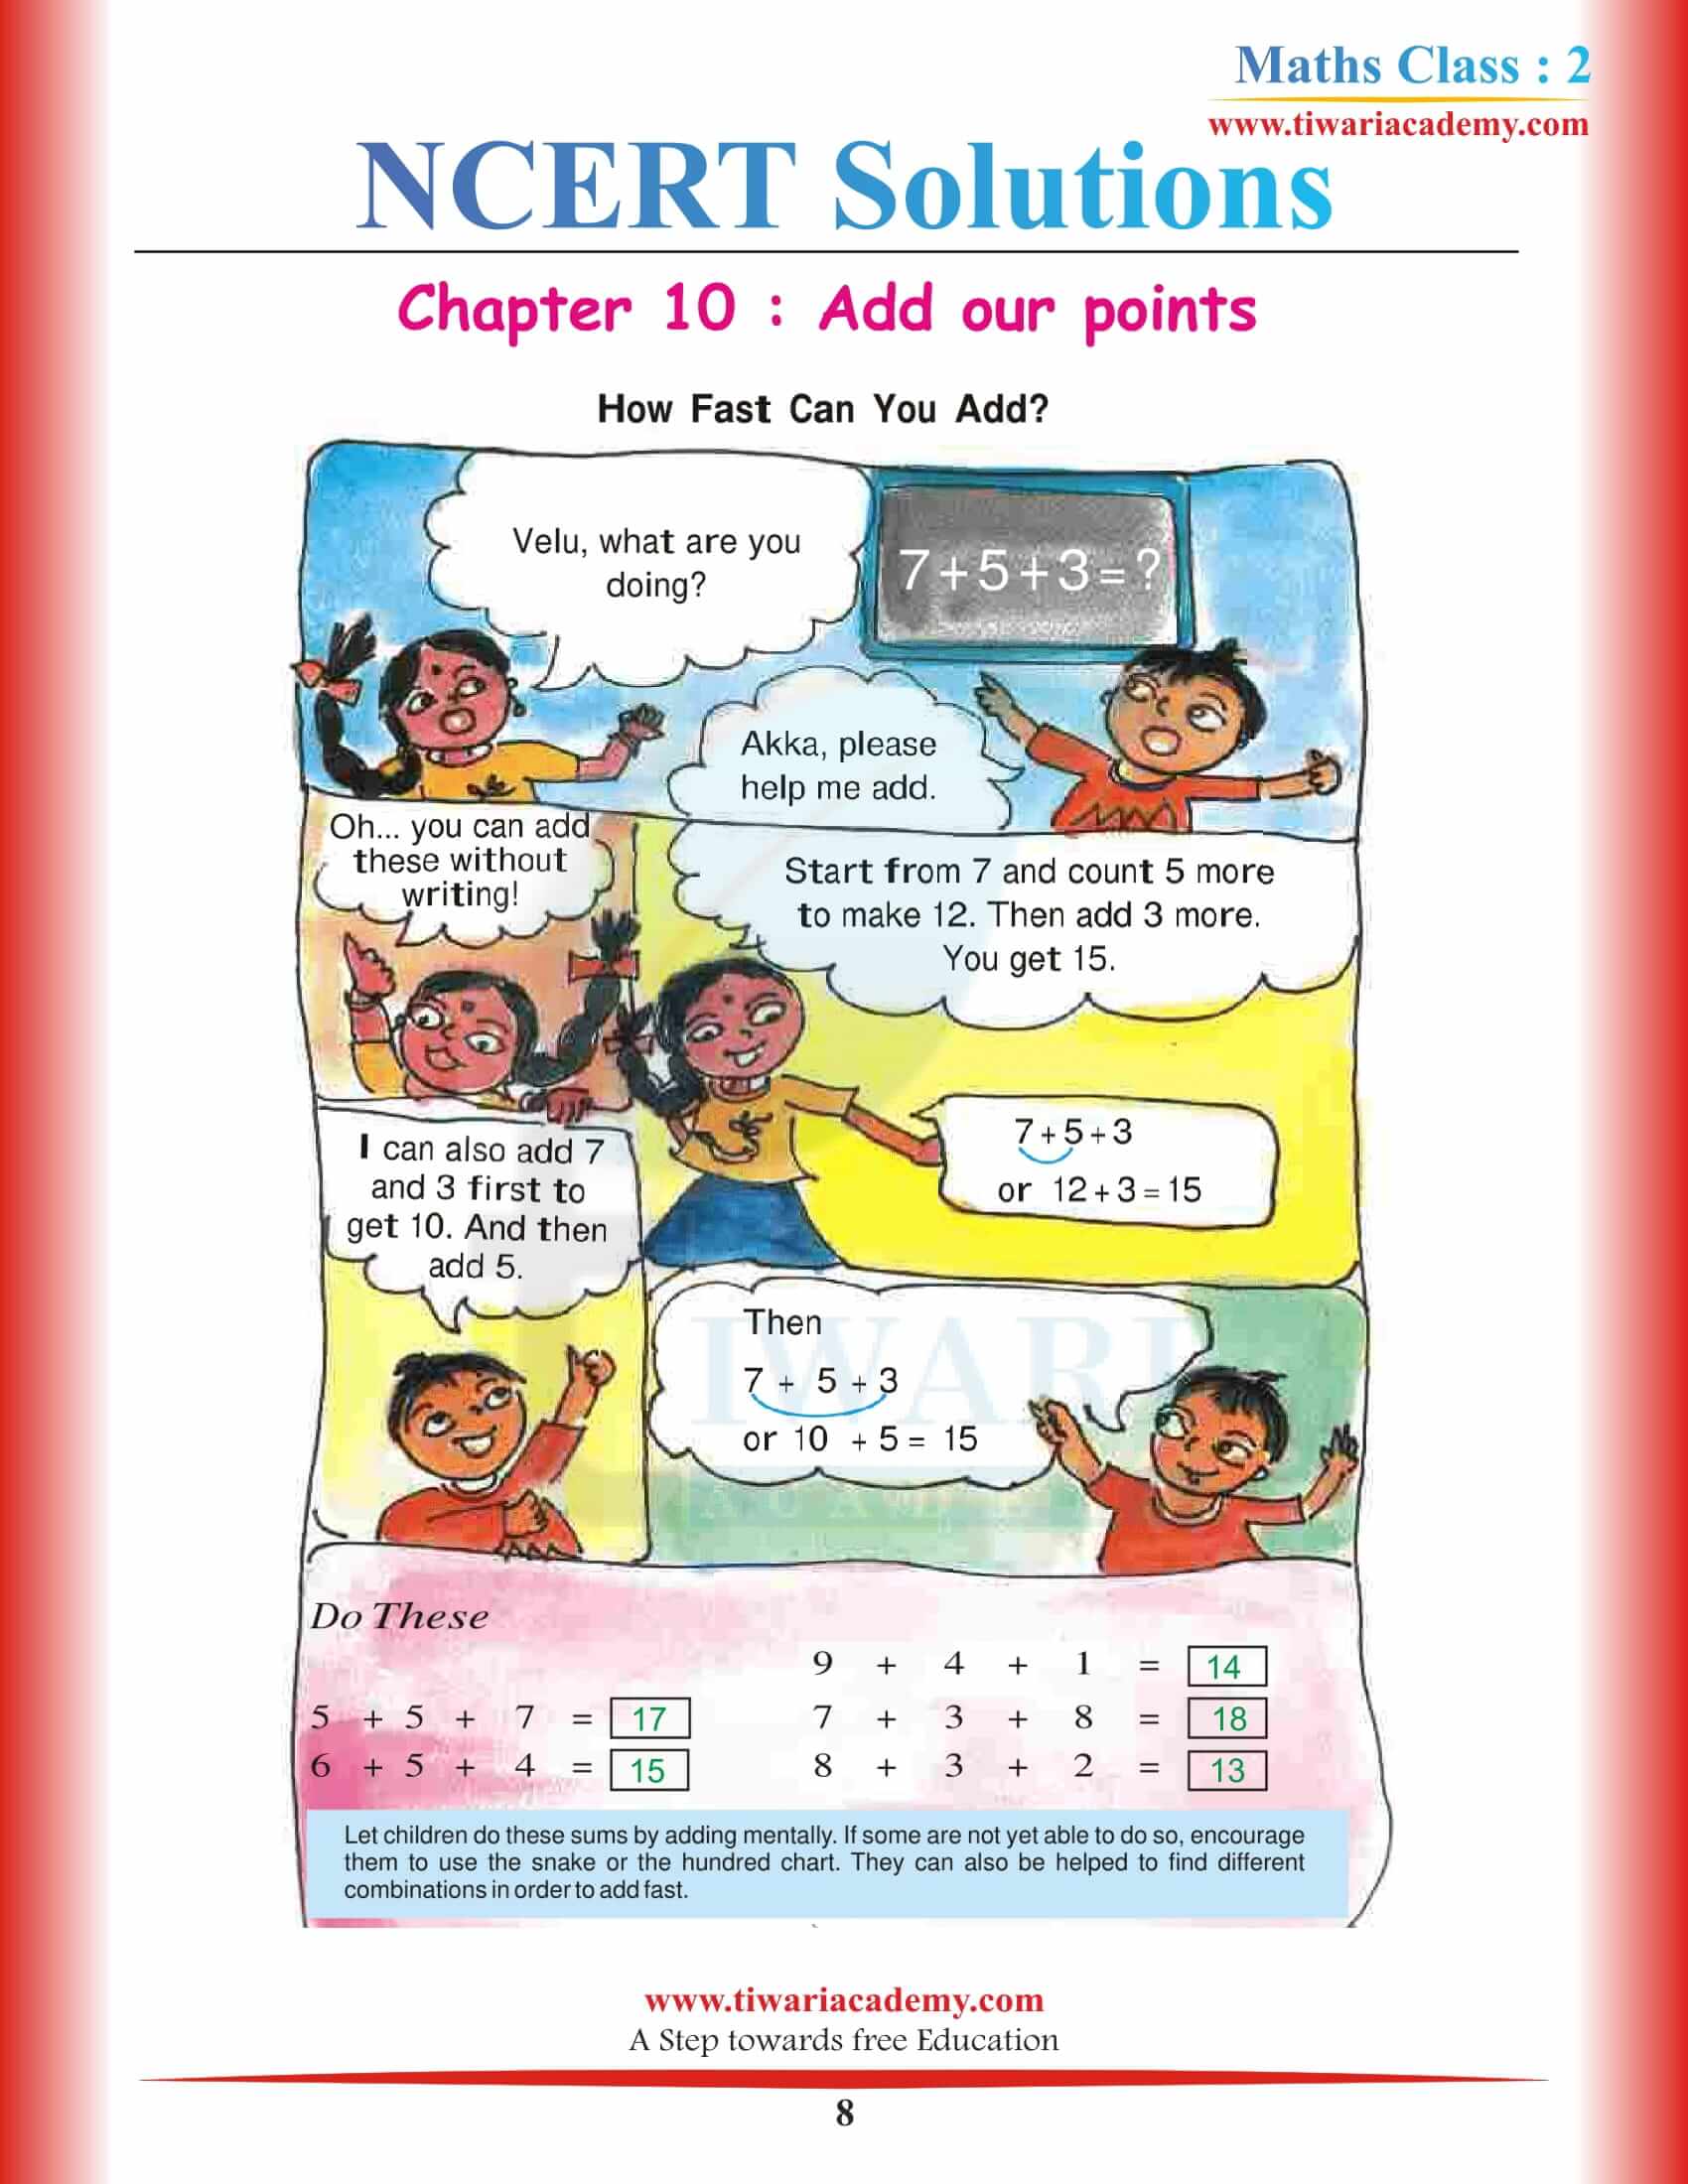 NCERT Solutions for Class 2 Maths Chapter 10 free download